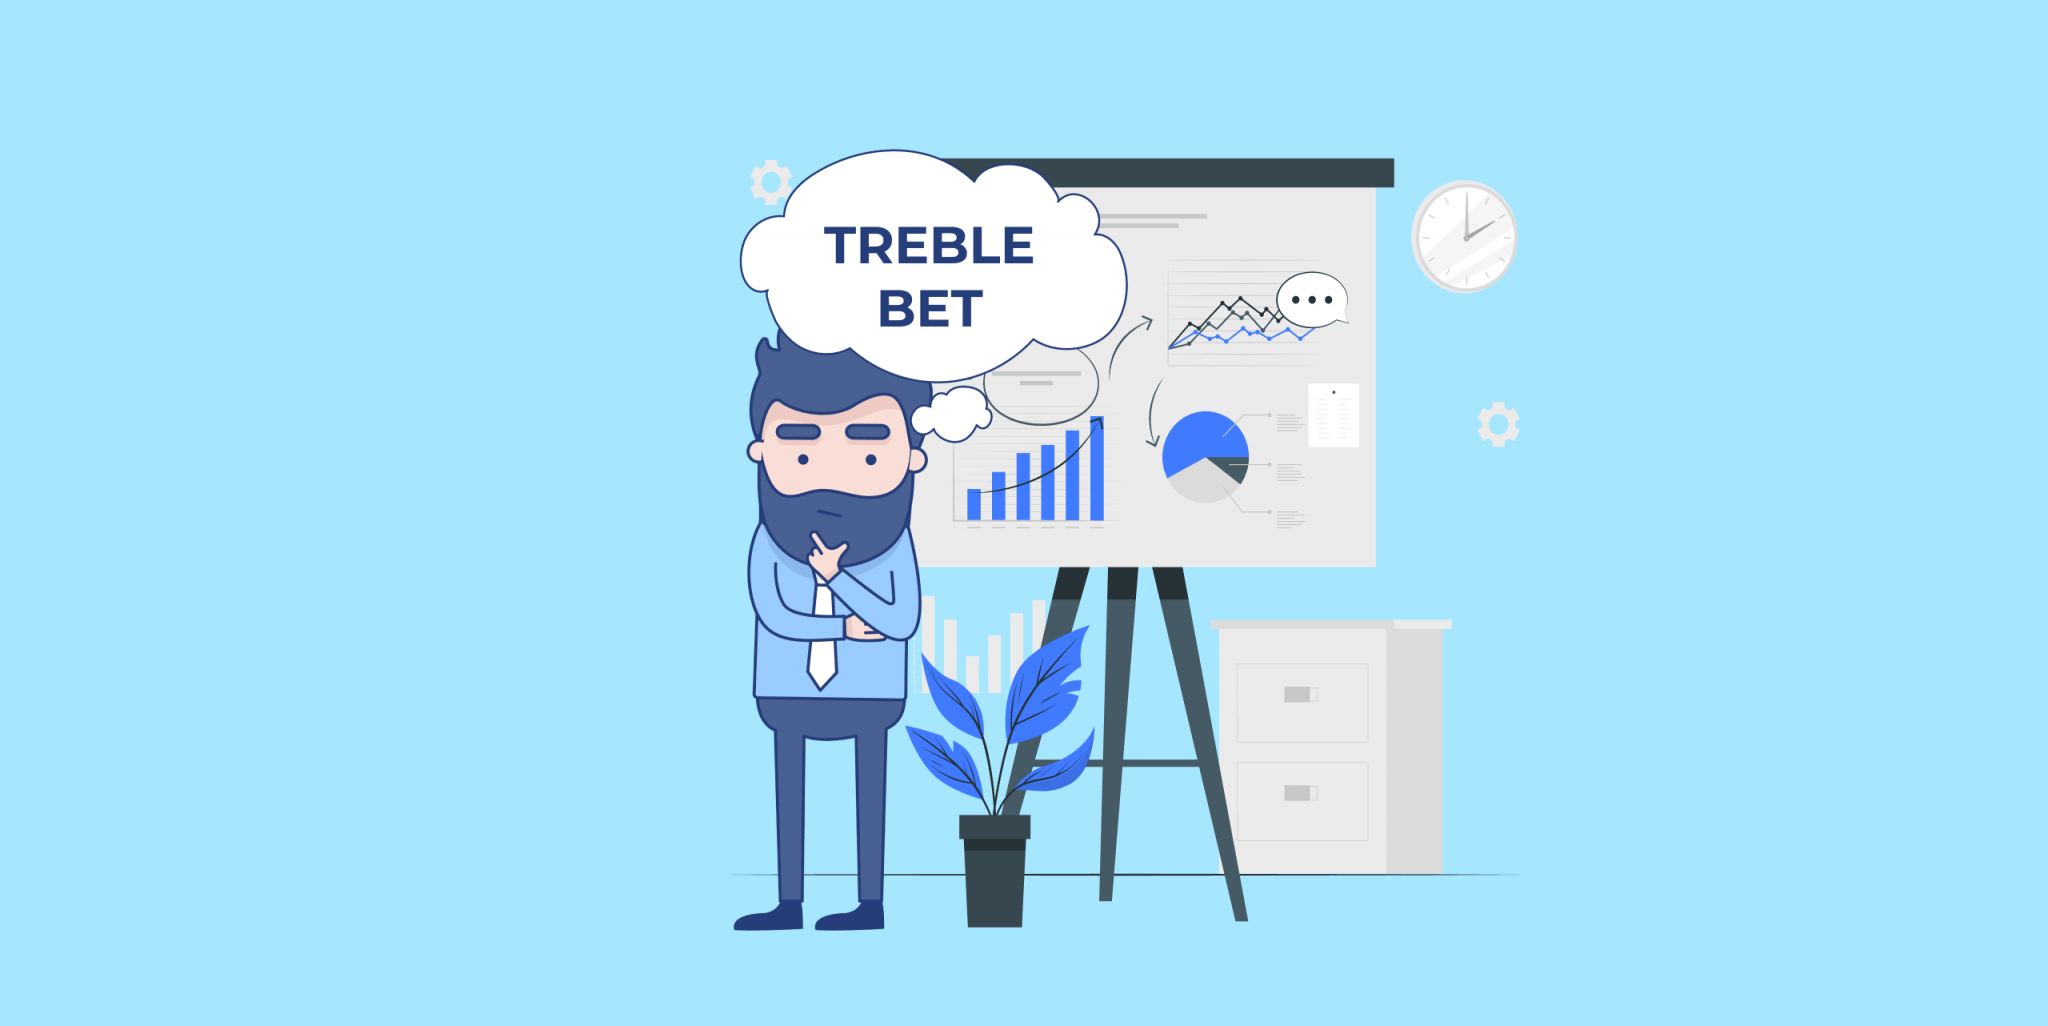 What is a Treble Bet?